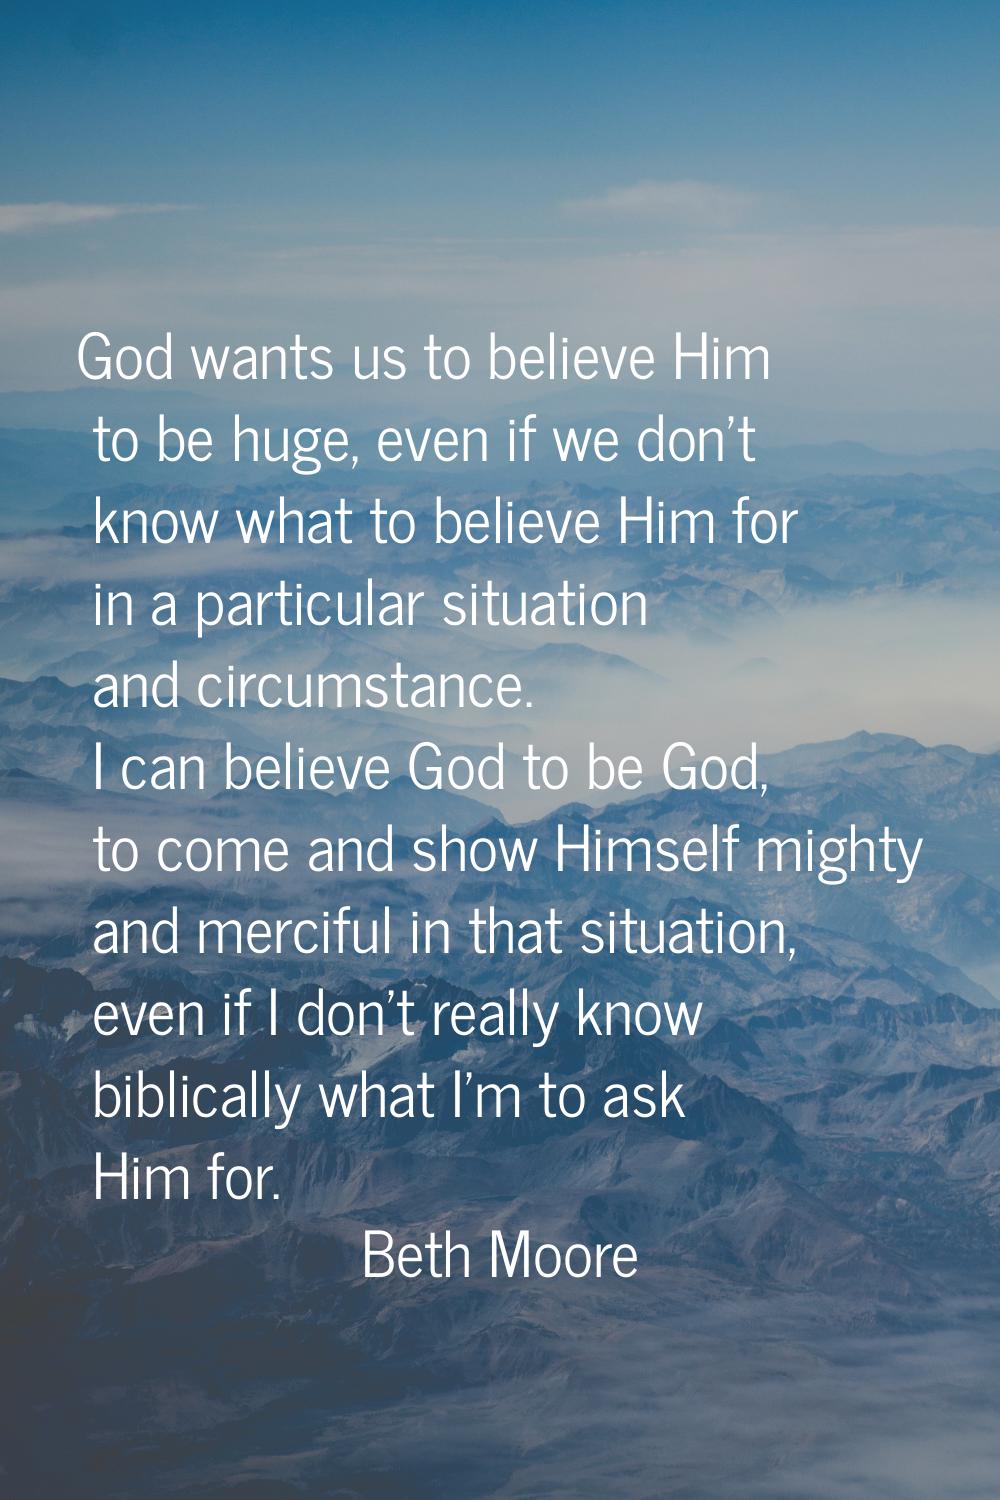 God wants us to believe Him to be huge, even if we don't know what to believe Him for in a particul